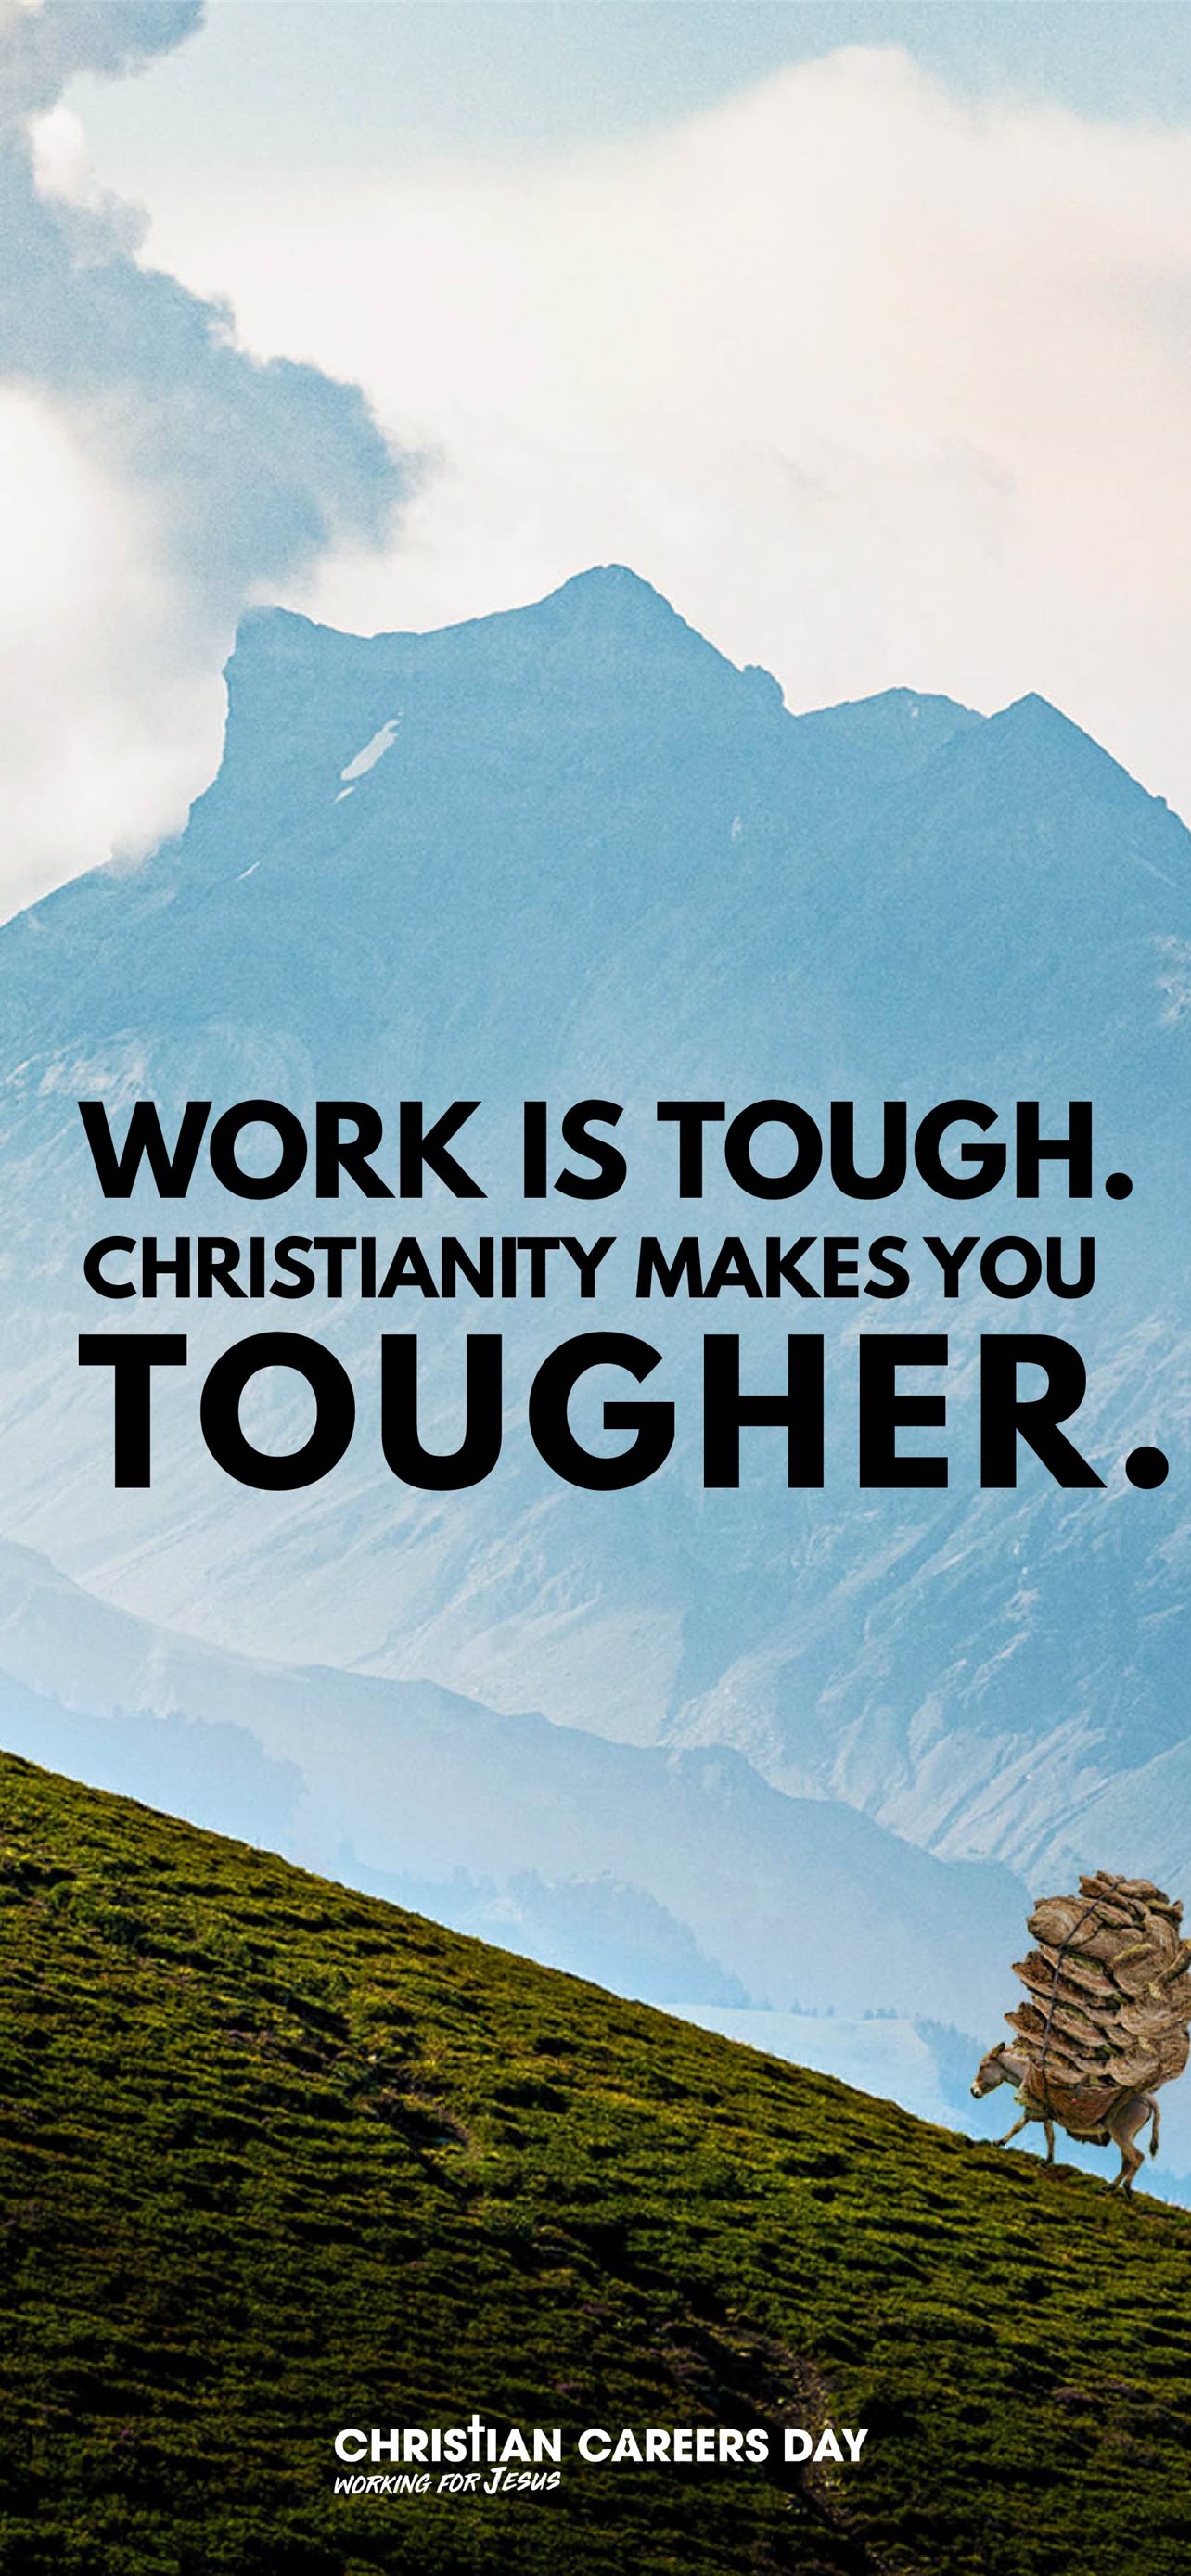 Work is tough Christianity makes you tougher iPhone Wallpaper Free Download